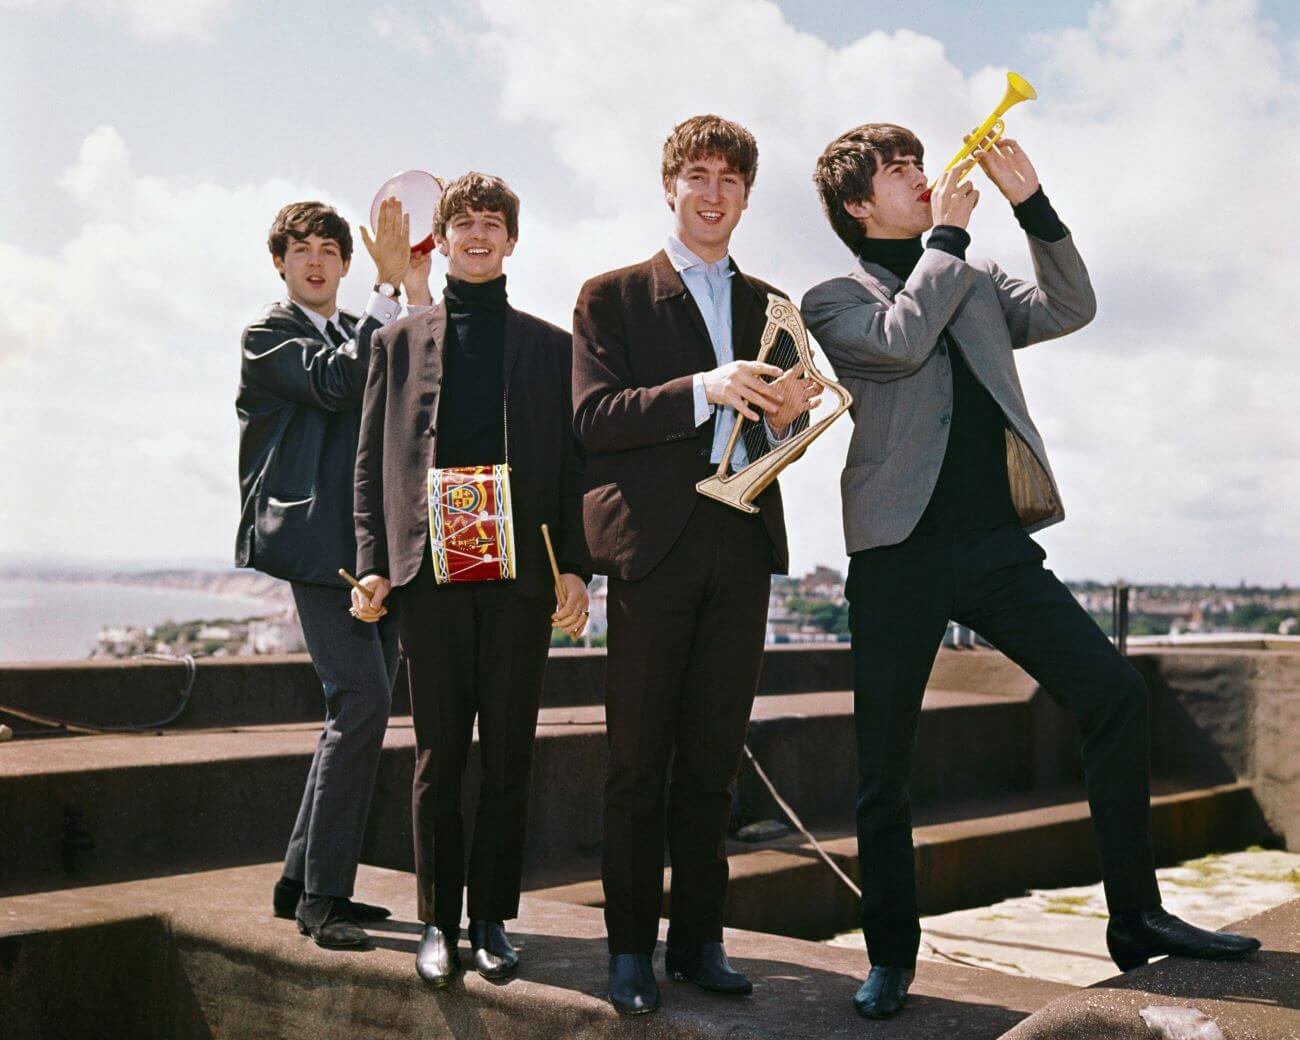 The Beatles stand on a roof holding small instruments.